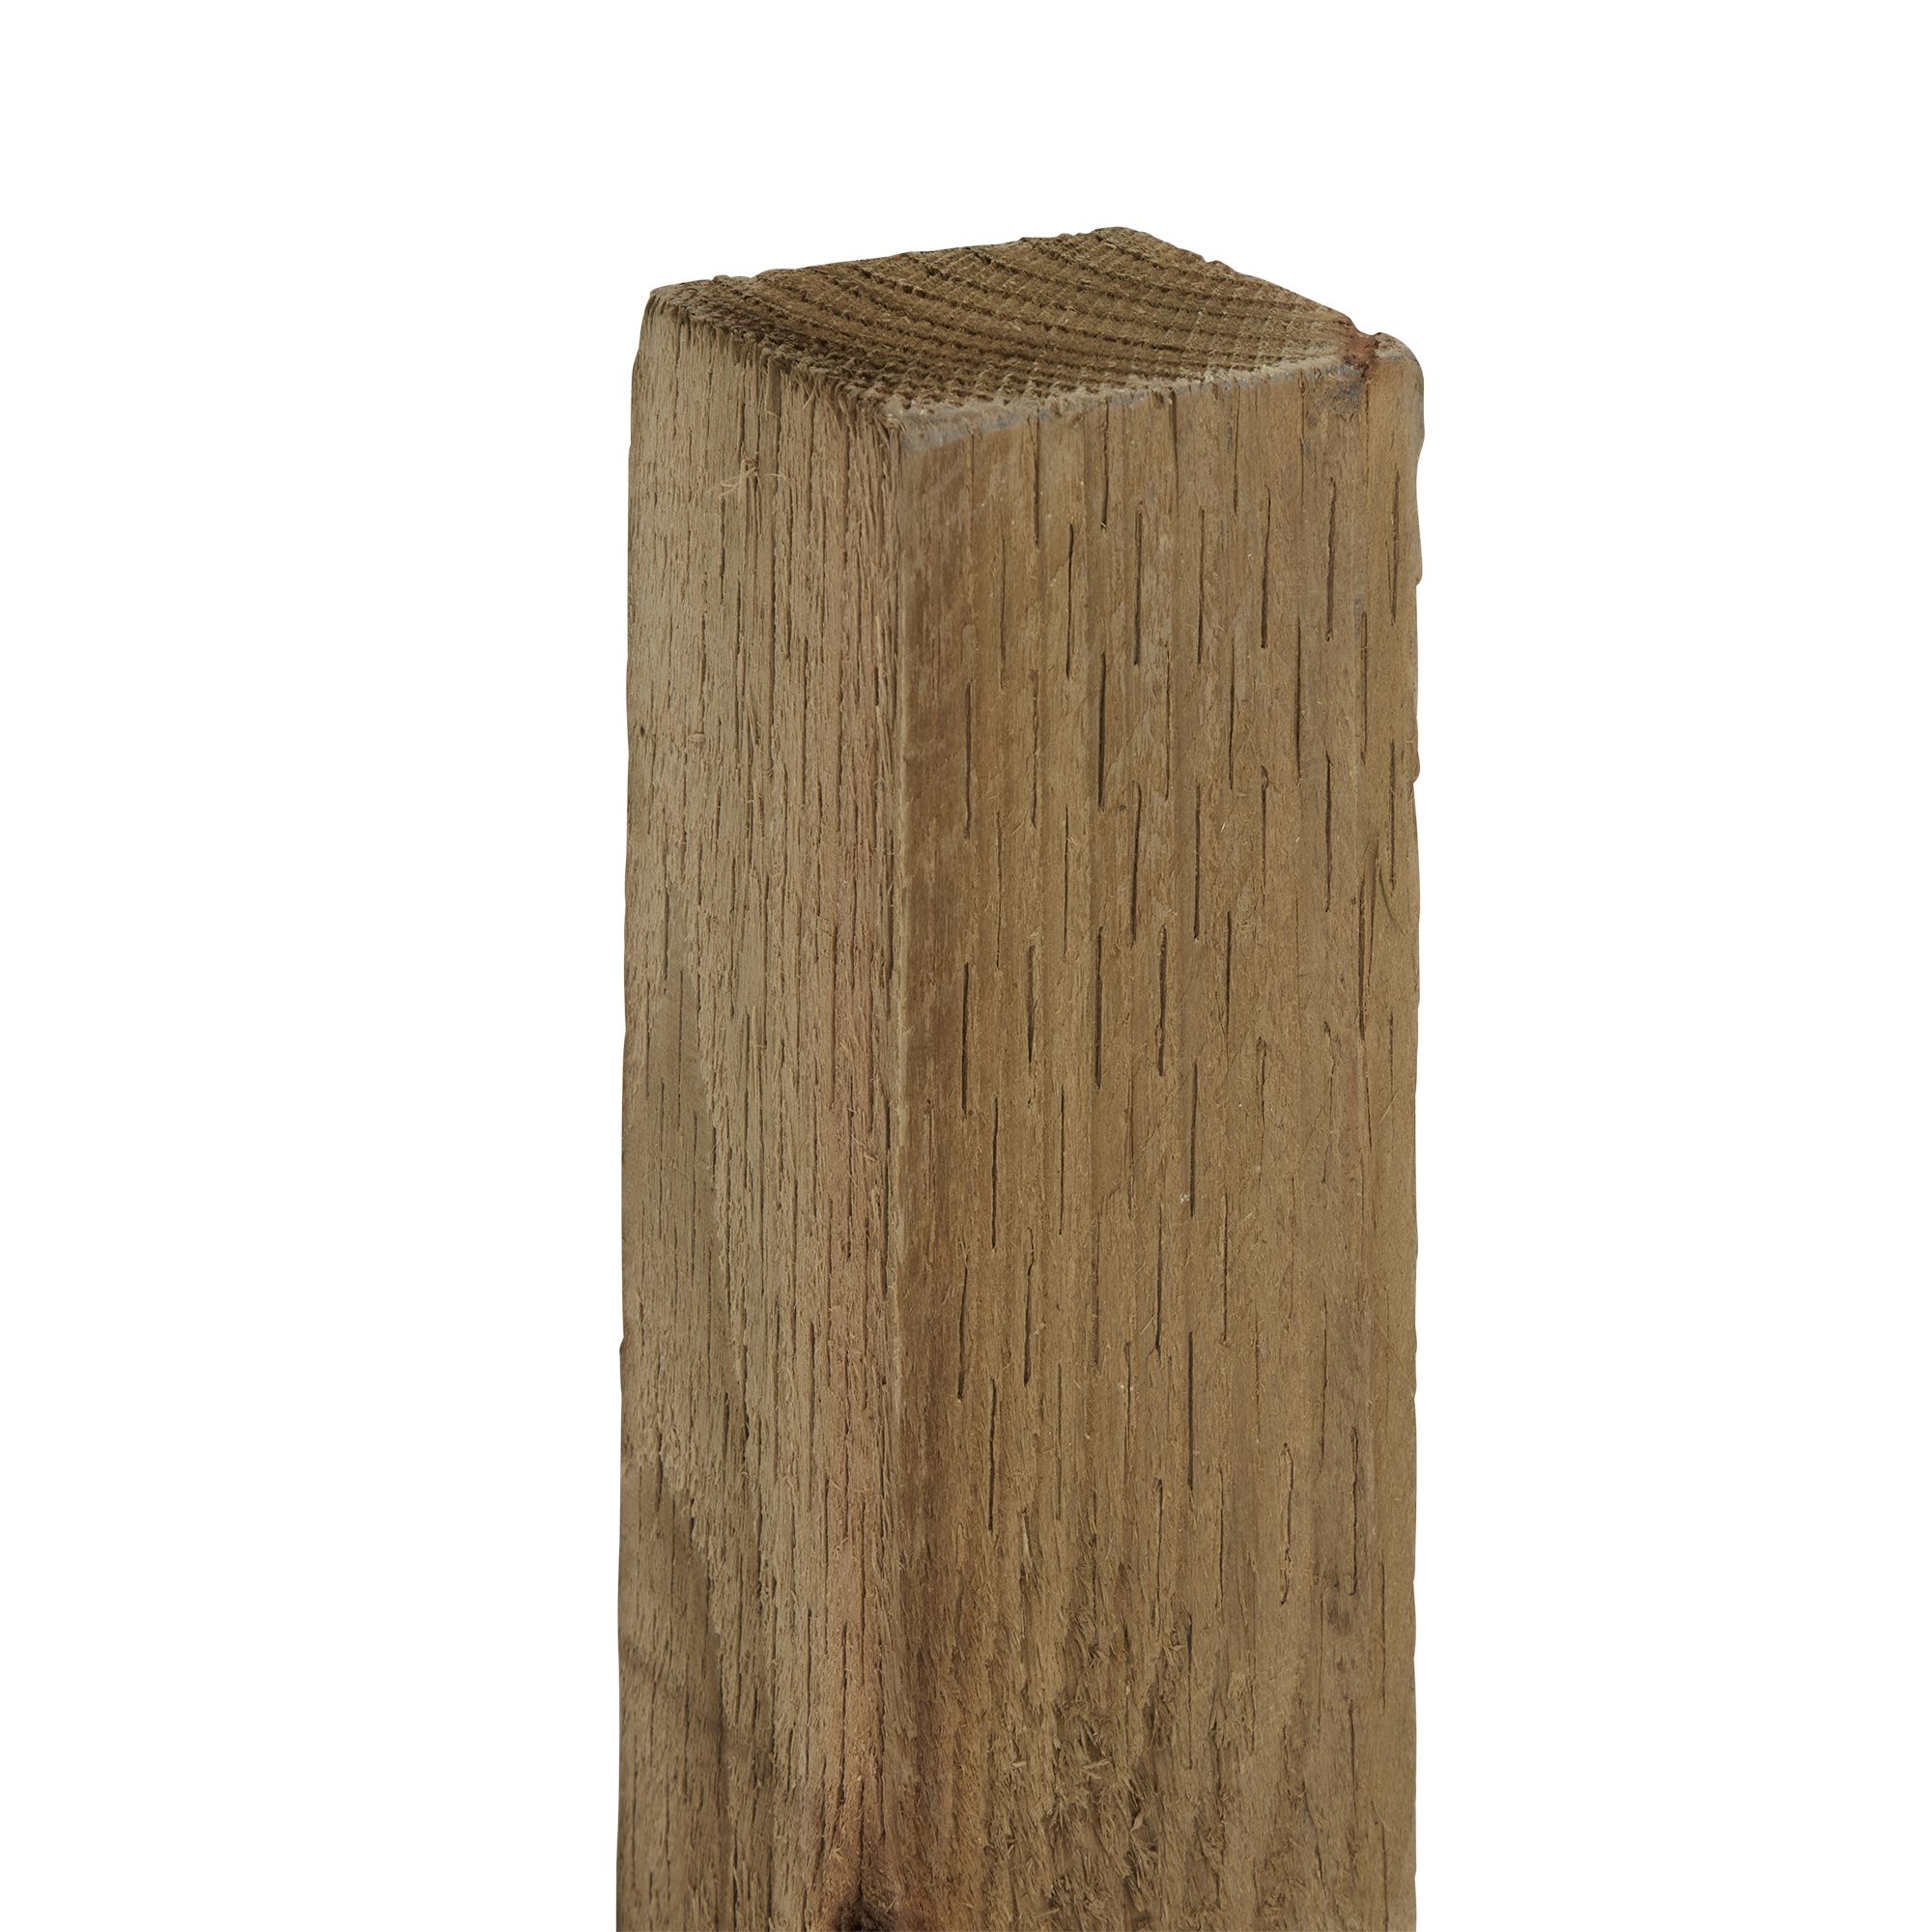 Blooma Green Square Wooden Fence post (H)2.4m (W)75mm